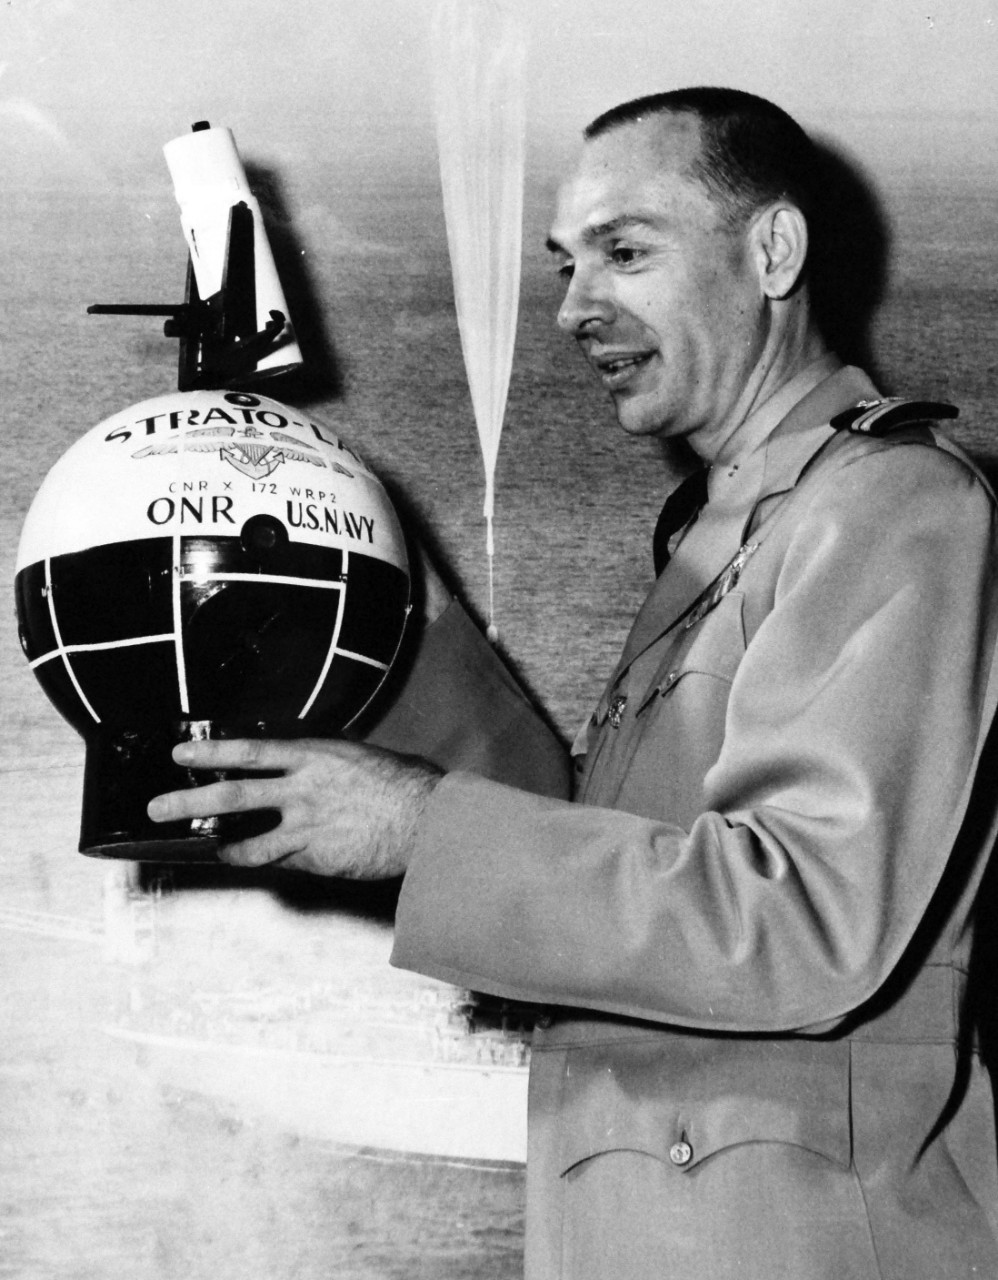 USN 1036187:    Model of Strato-Lab  Gondola.  Commander Malcolm D. Ross, USNR, holds a model of the Strato-Lab Gondola with 16-inch telescope on top, circa 1961.  Official U.S. Navy photograph, now in the collections of the National Archives.     